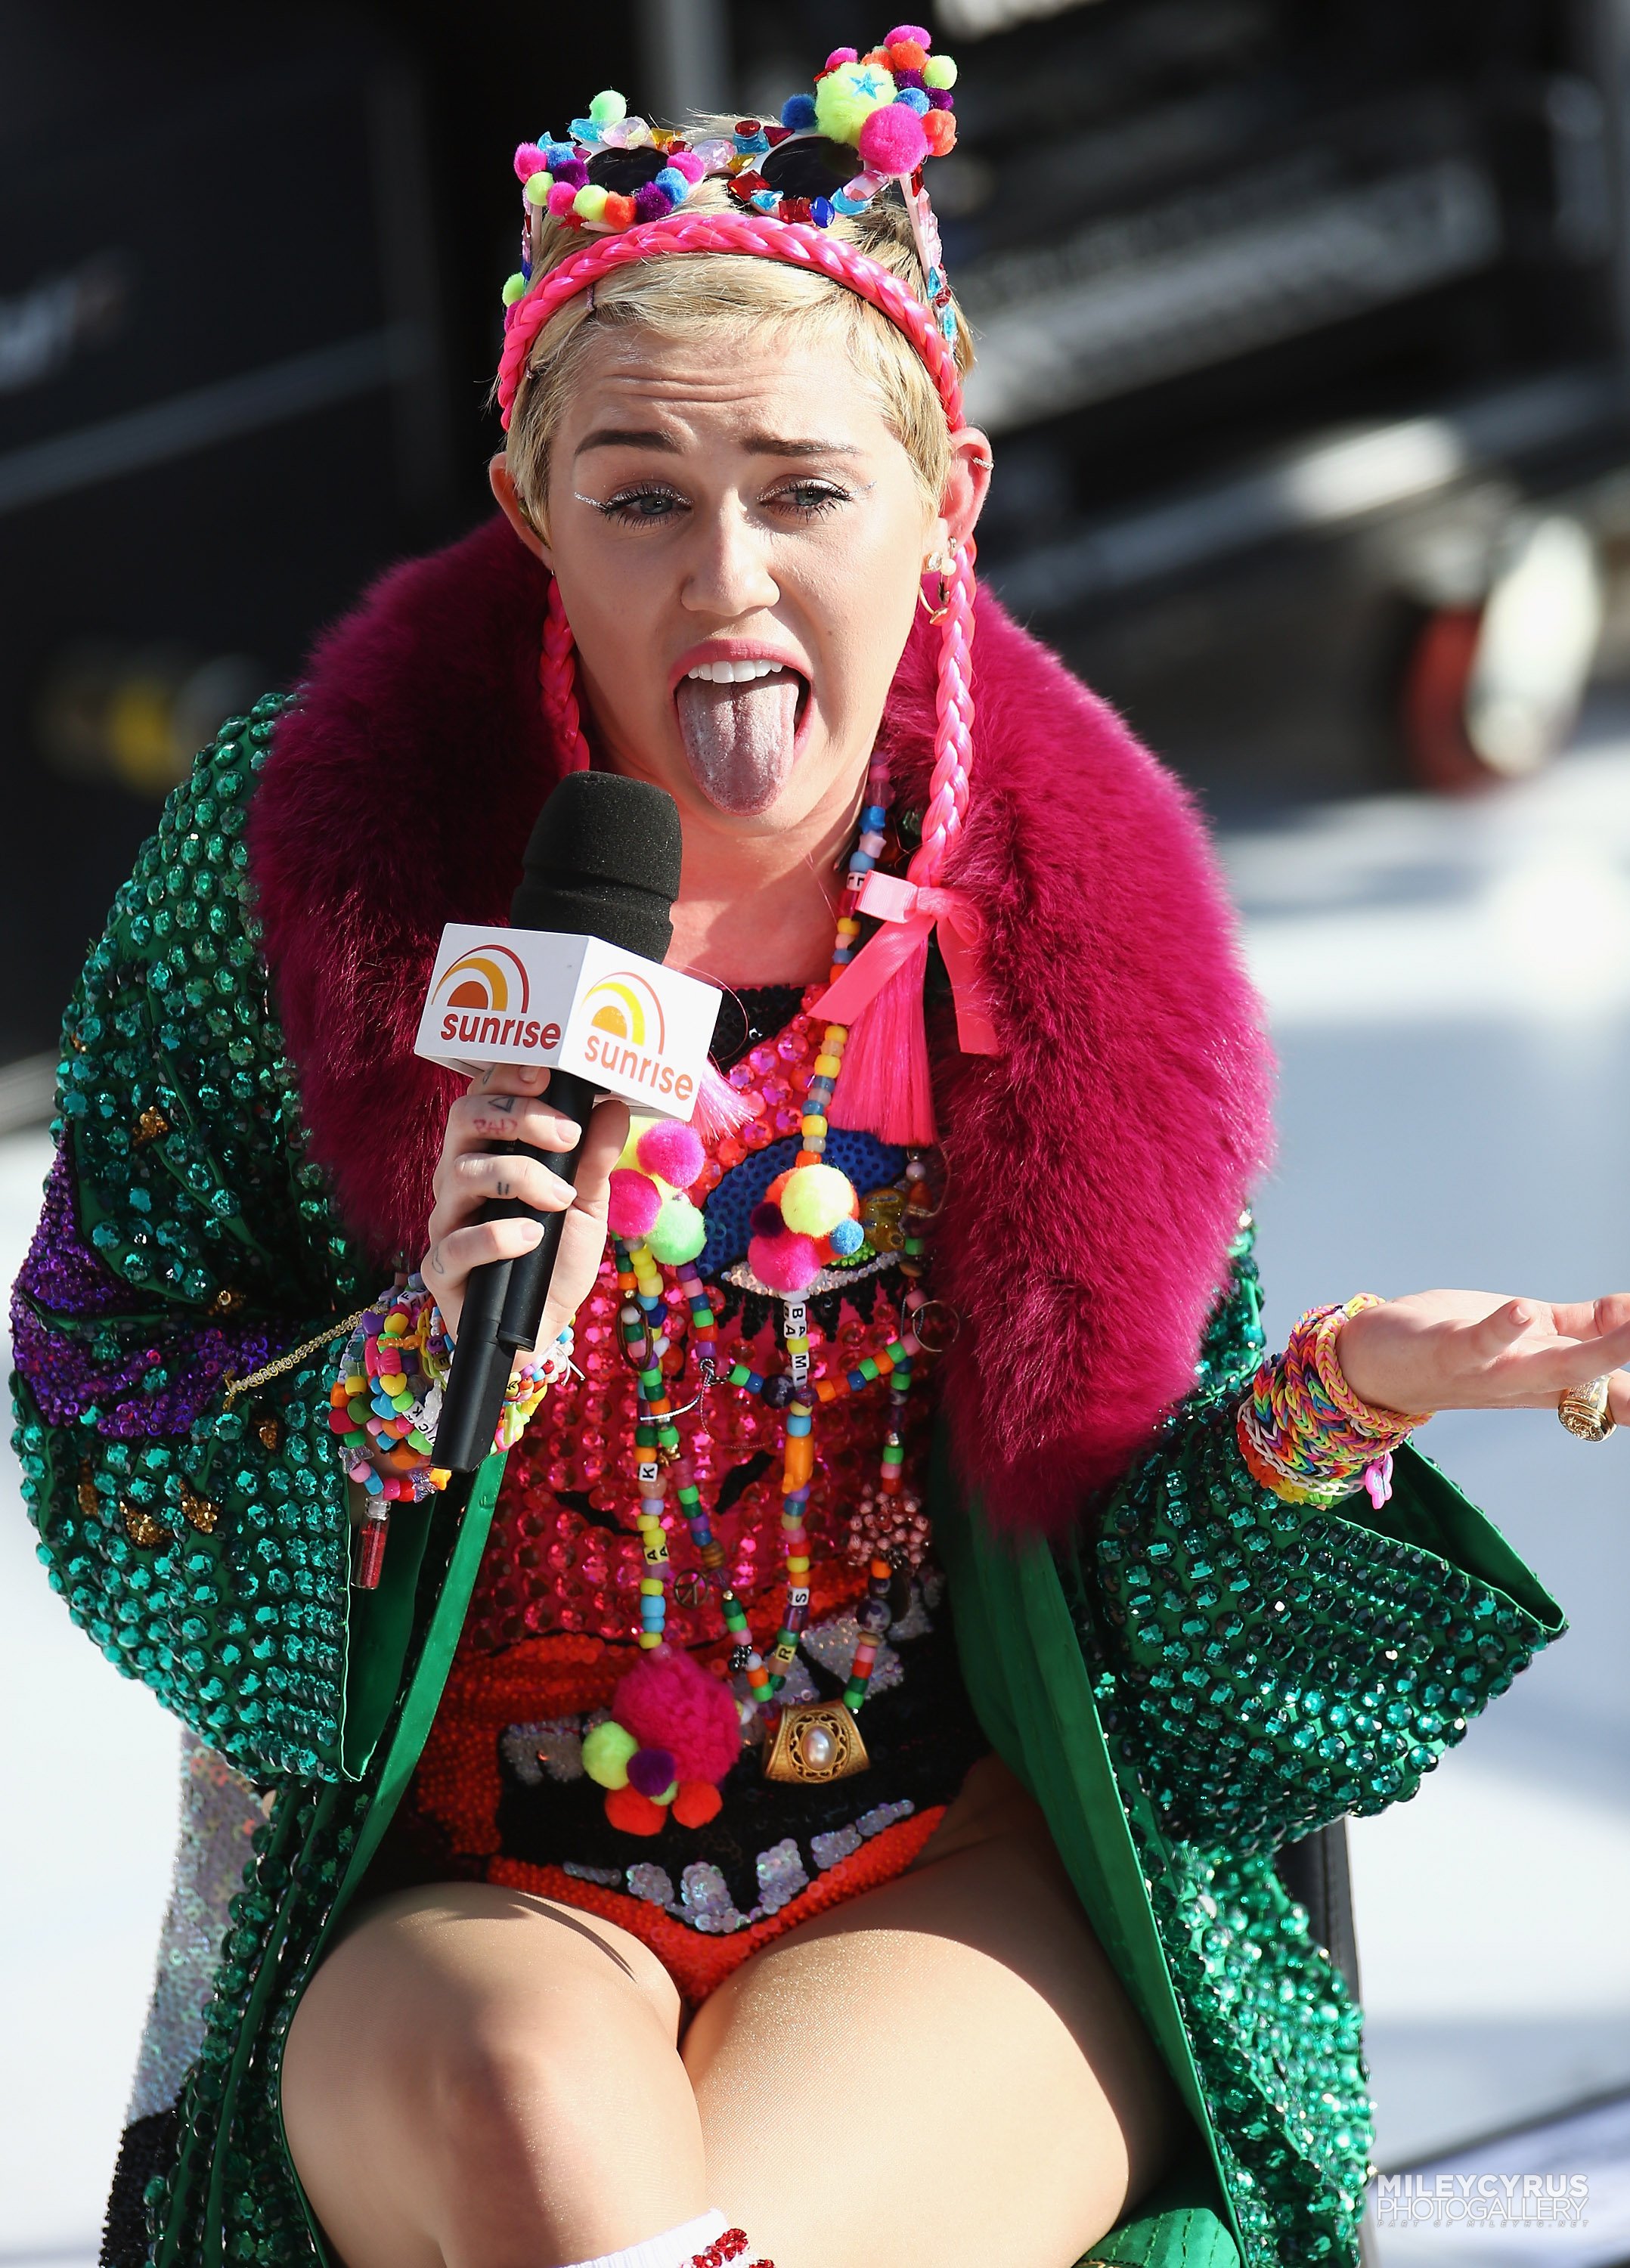 Miley Cyrus - Preforms Live at Sunrise Morning TV at Opera House in Sydney